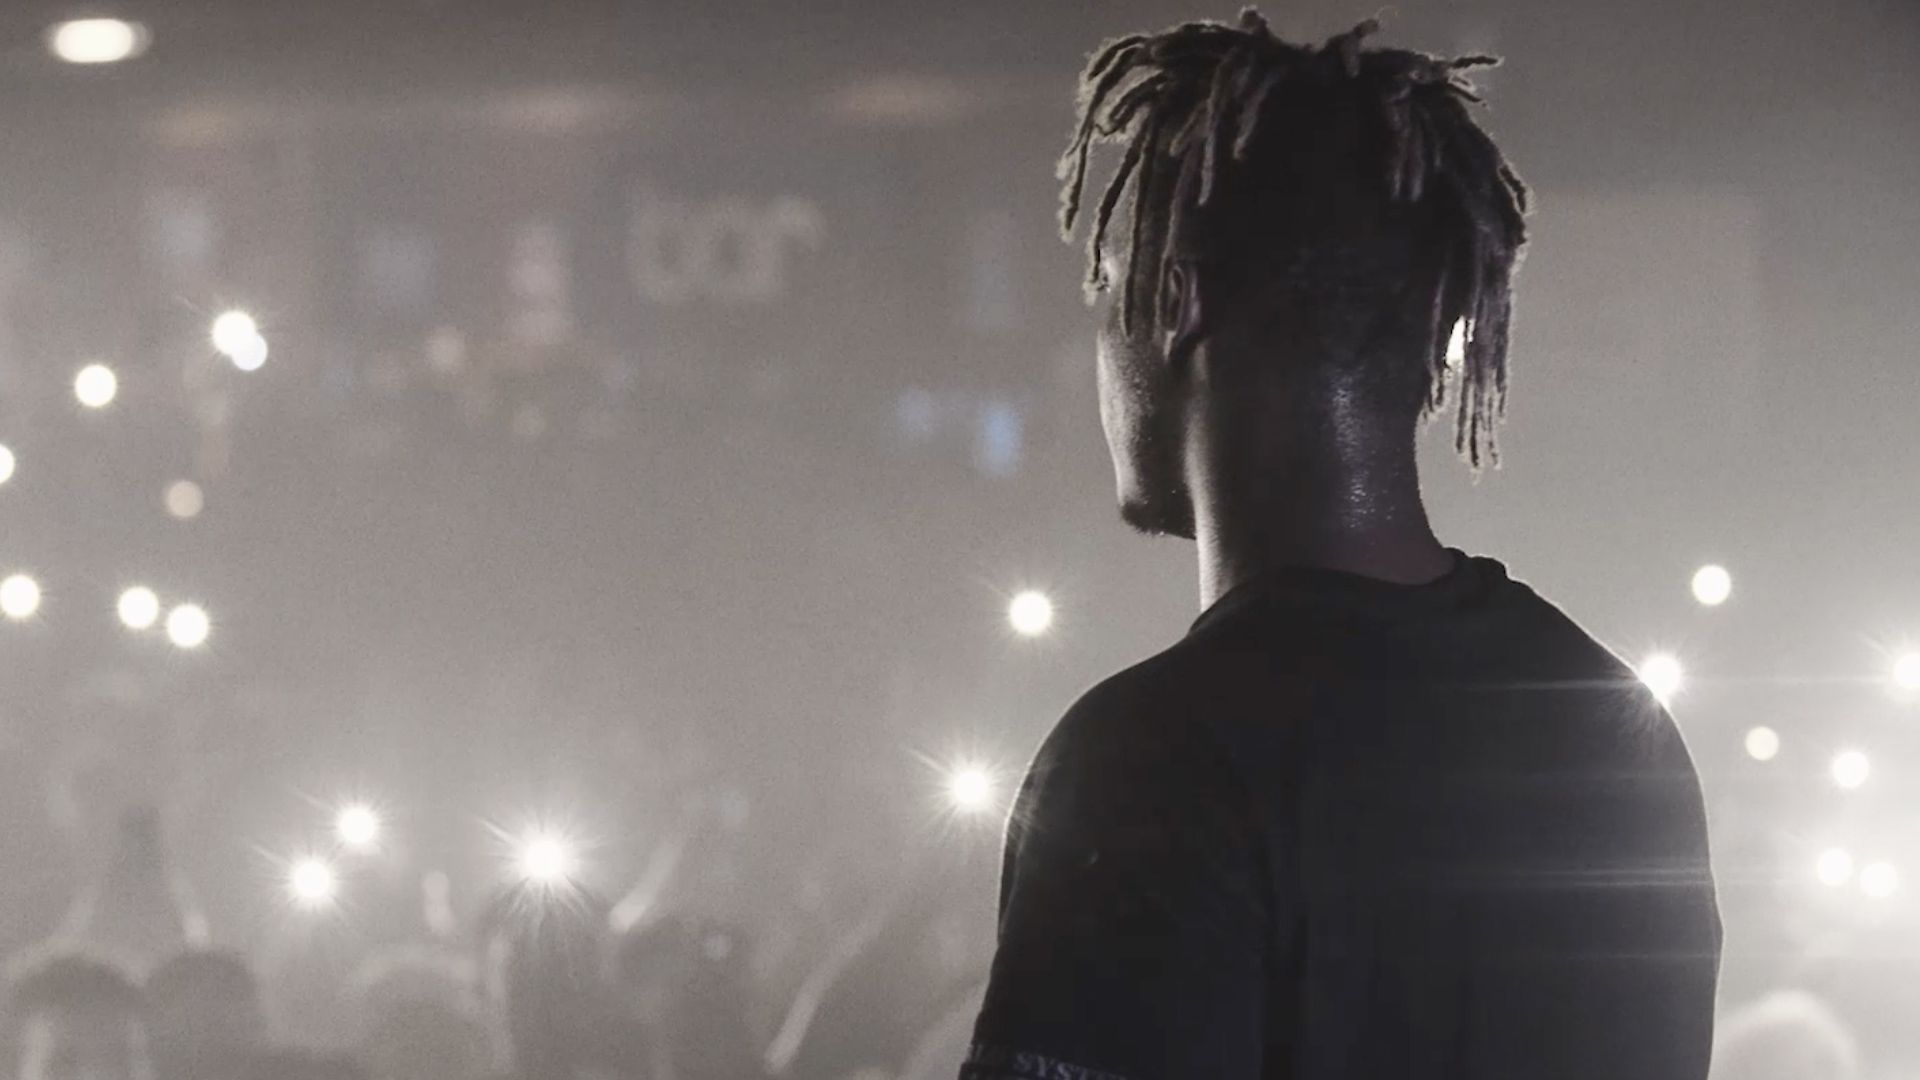 Juice Wrld Wallpapers 1920x1080 posted by Sarah Tremblay.